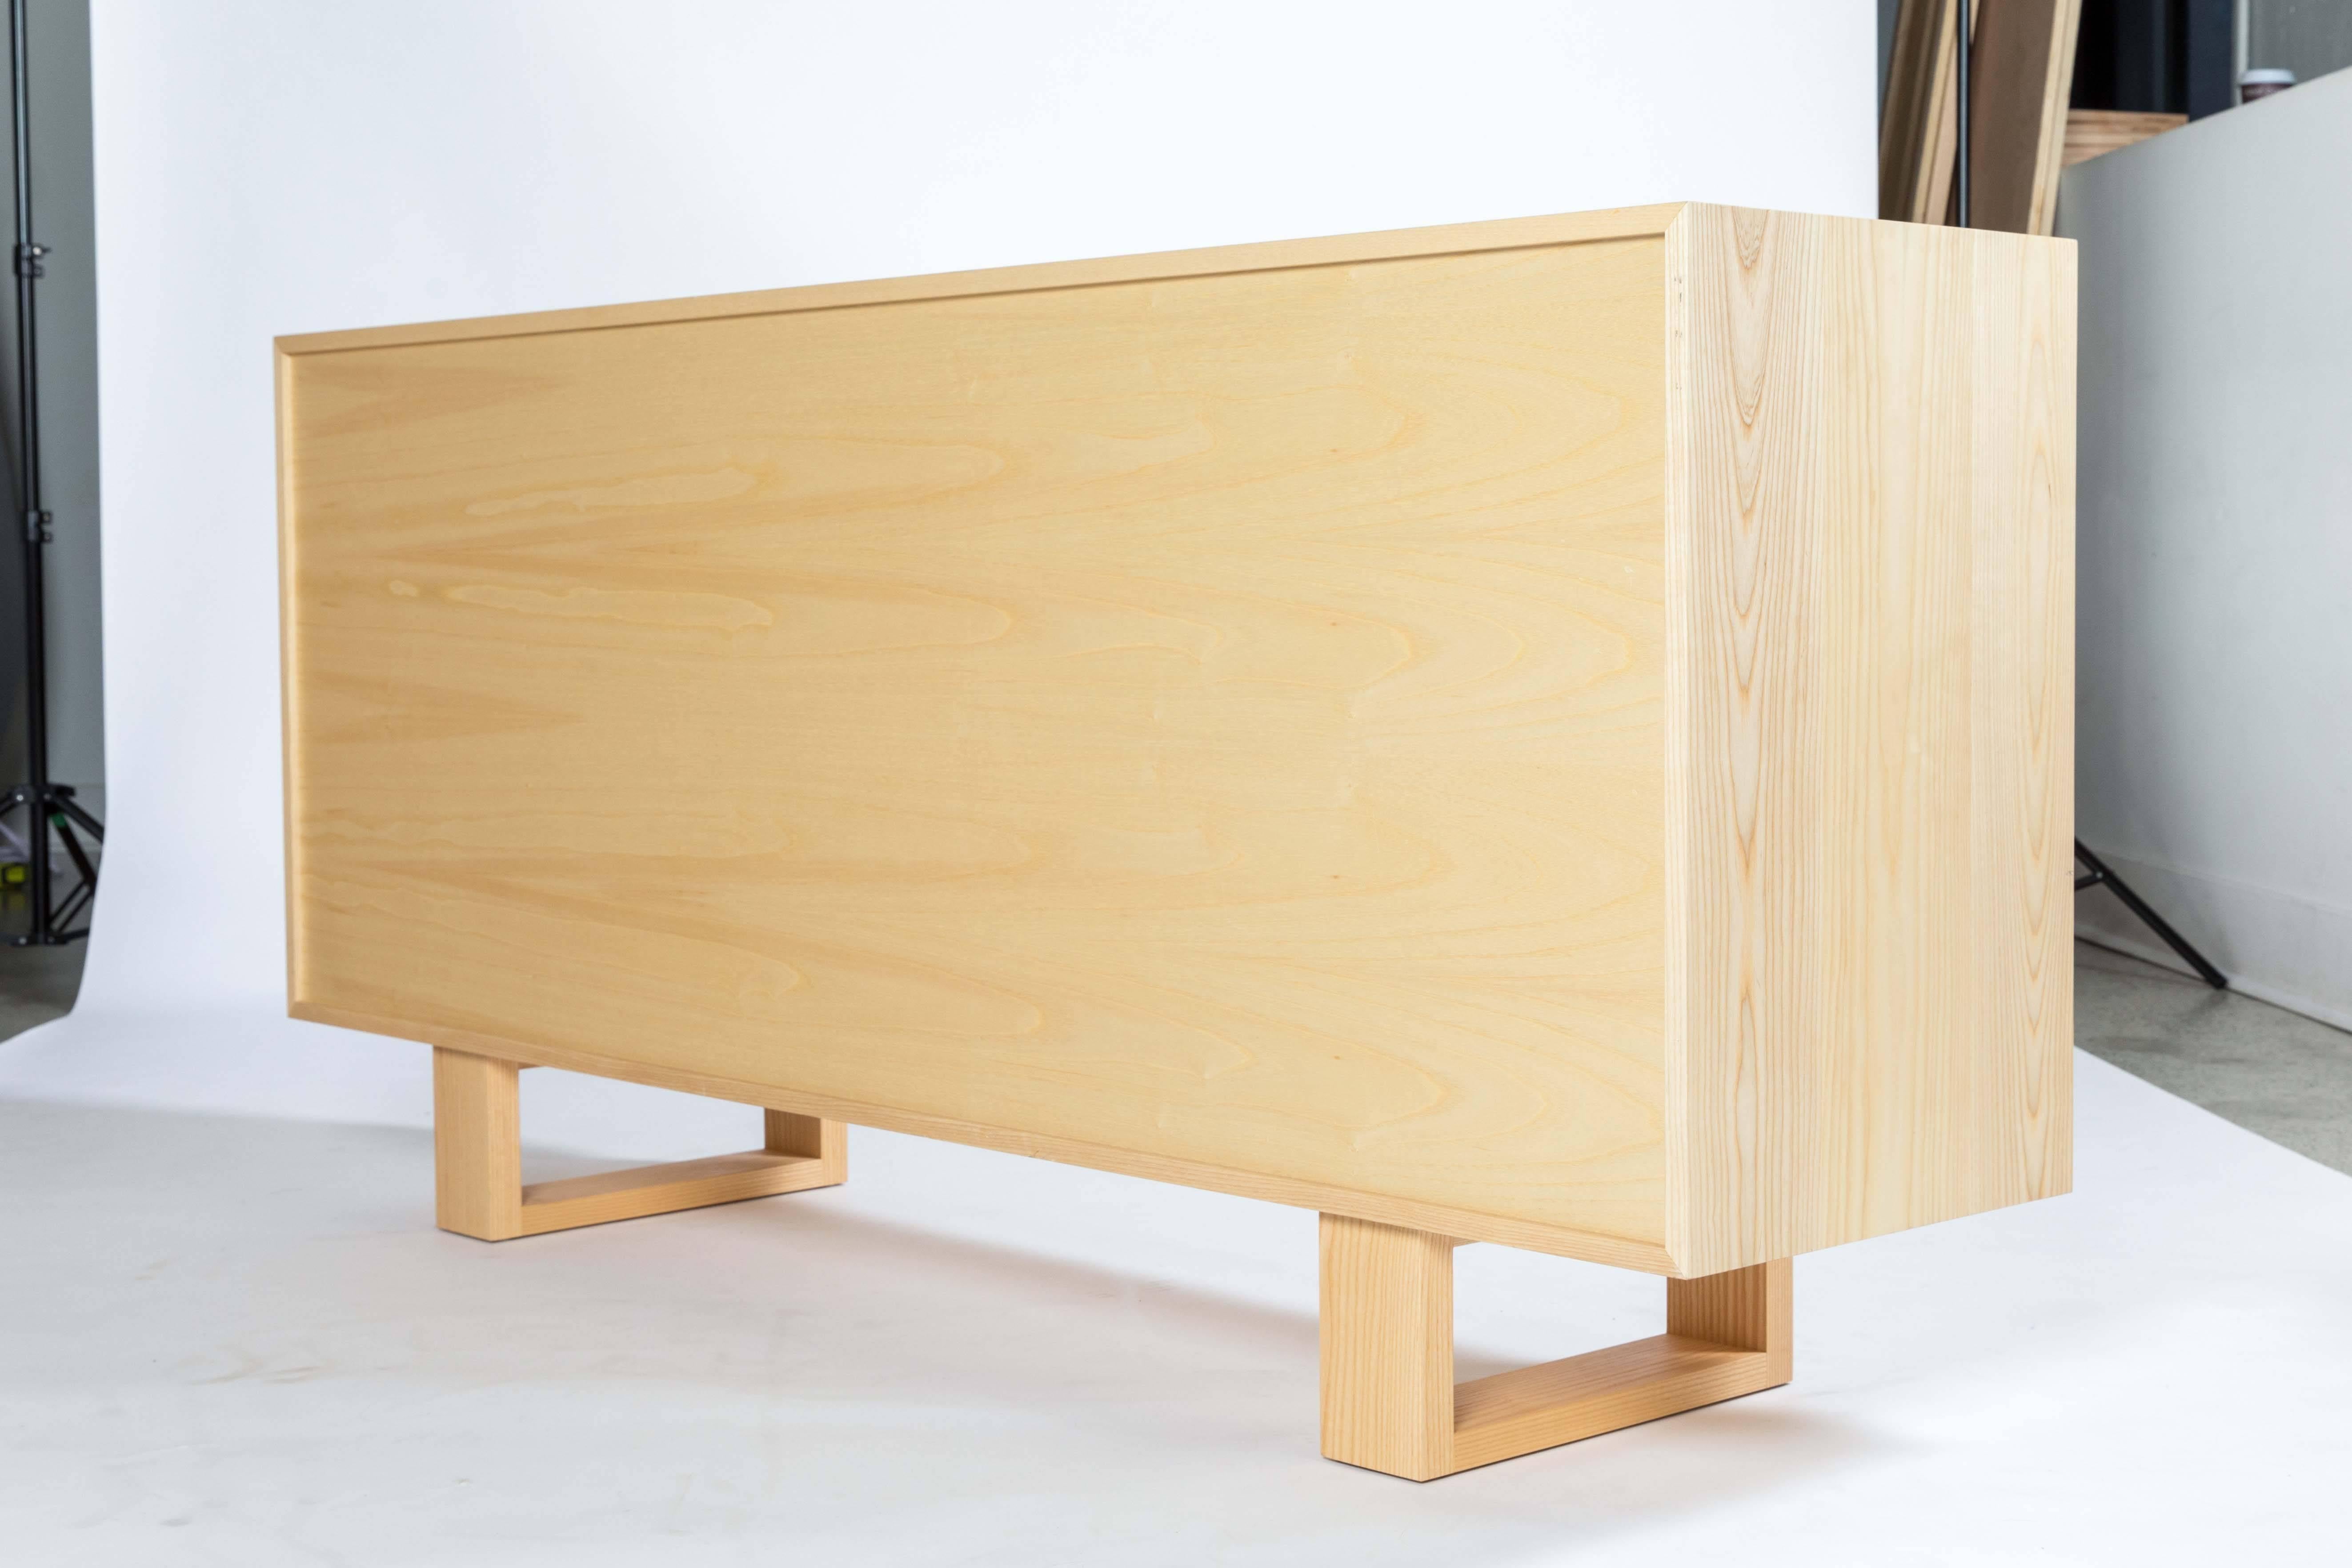 The Debra credenza by Kate Duncan is made of solid hardwood and the back is completely finished. Drawers are crafted using traditional dovetail joinery and open and close on a concealed soft-close drawer slide. For added luxury, drawer bottoms are